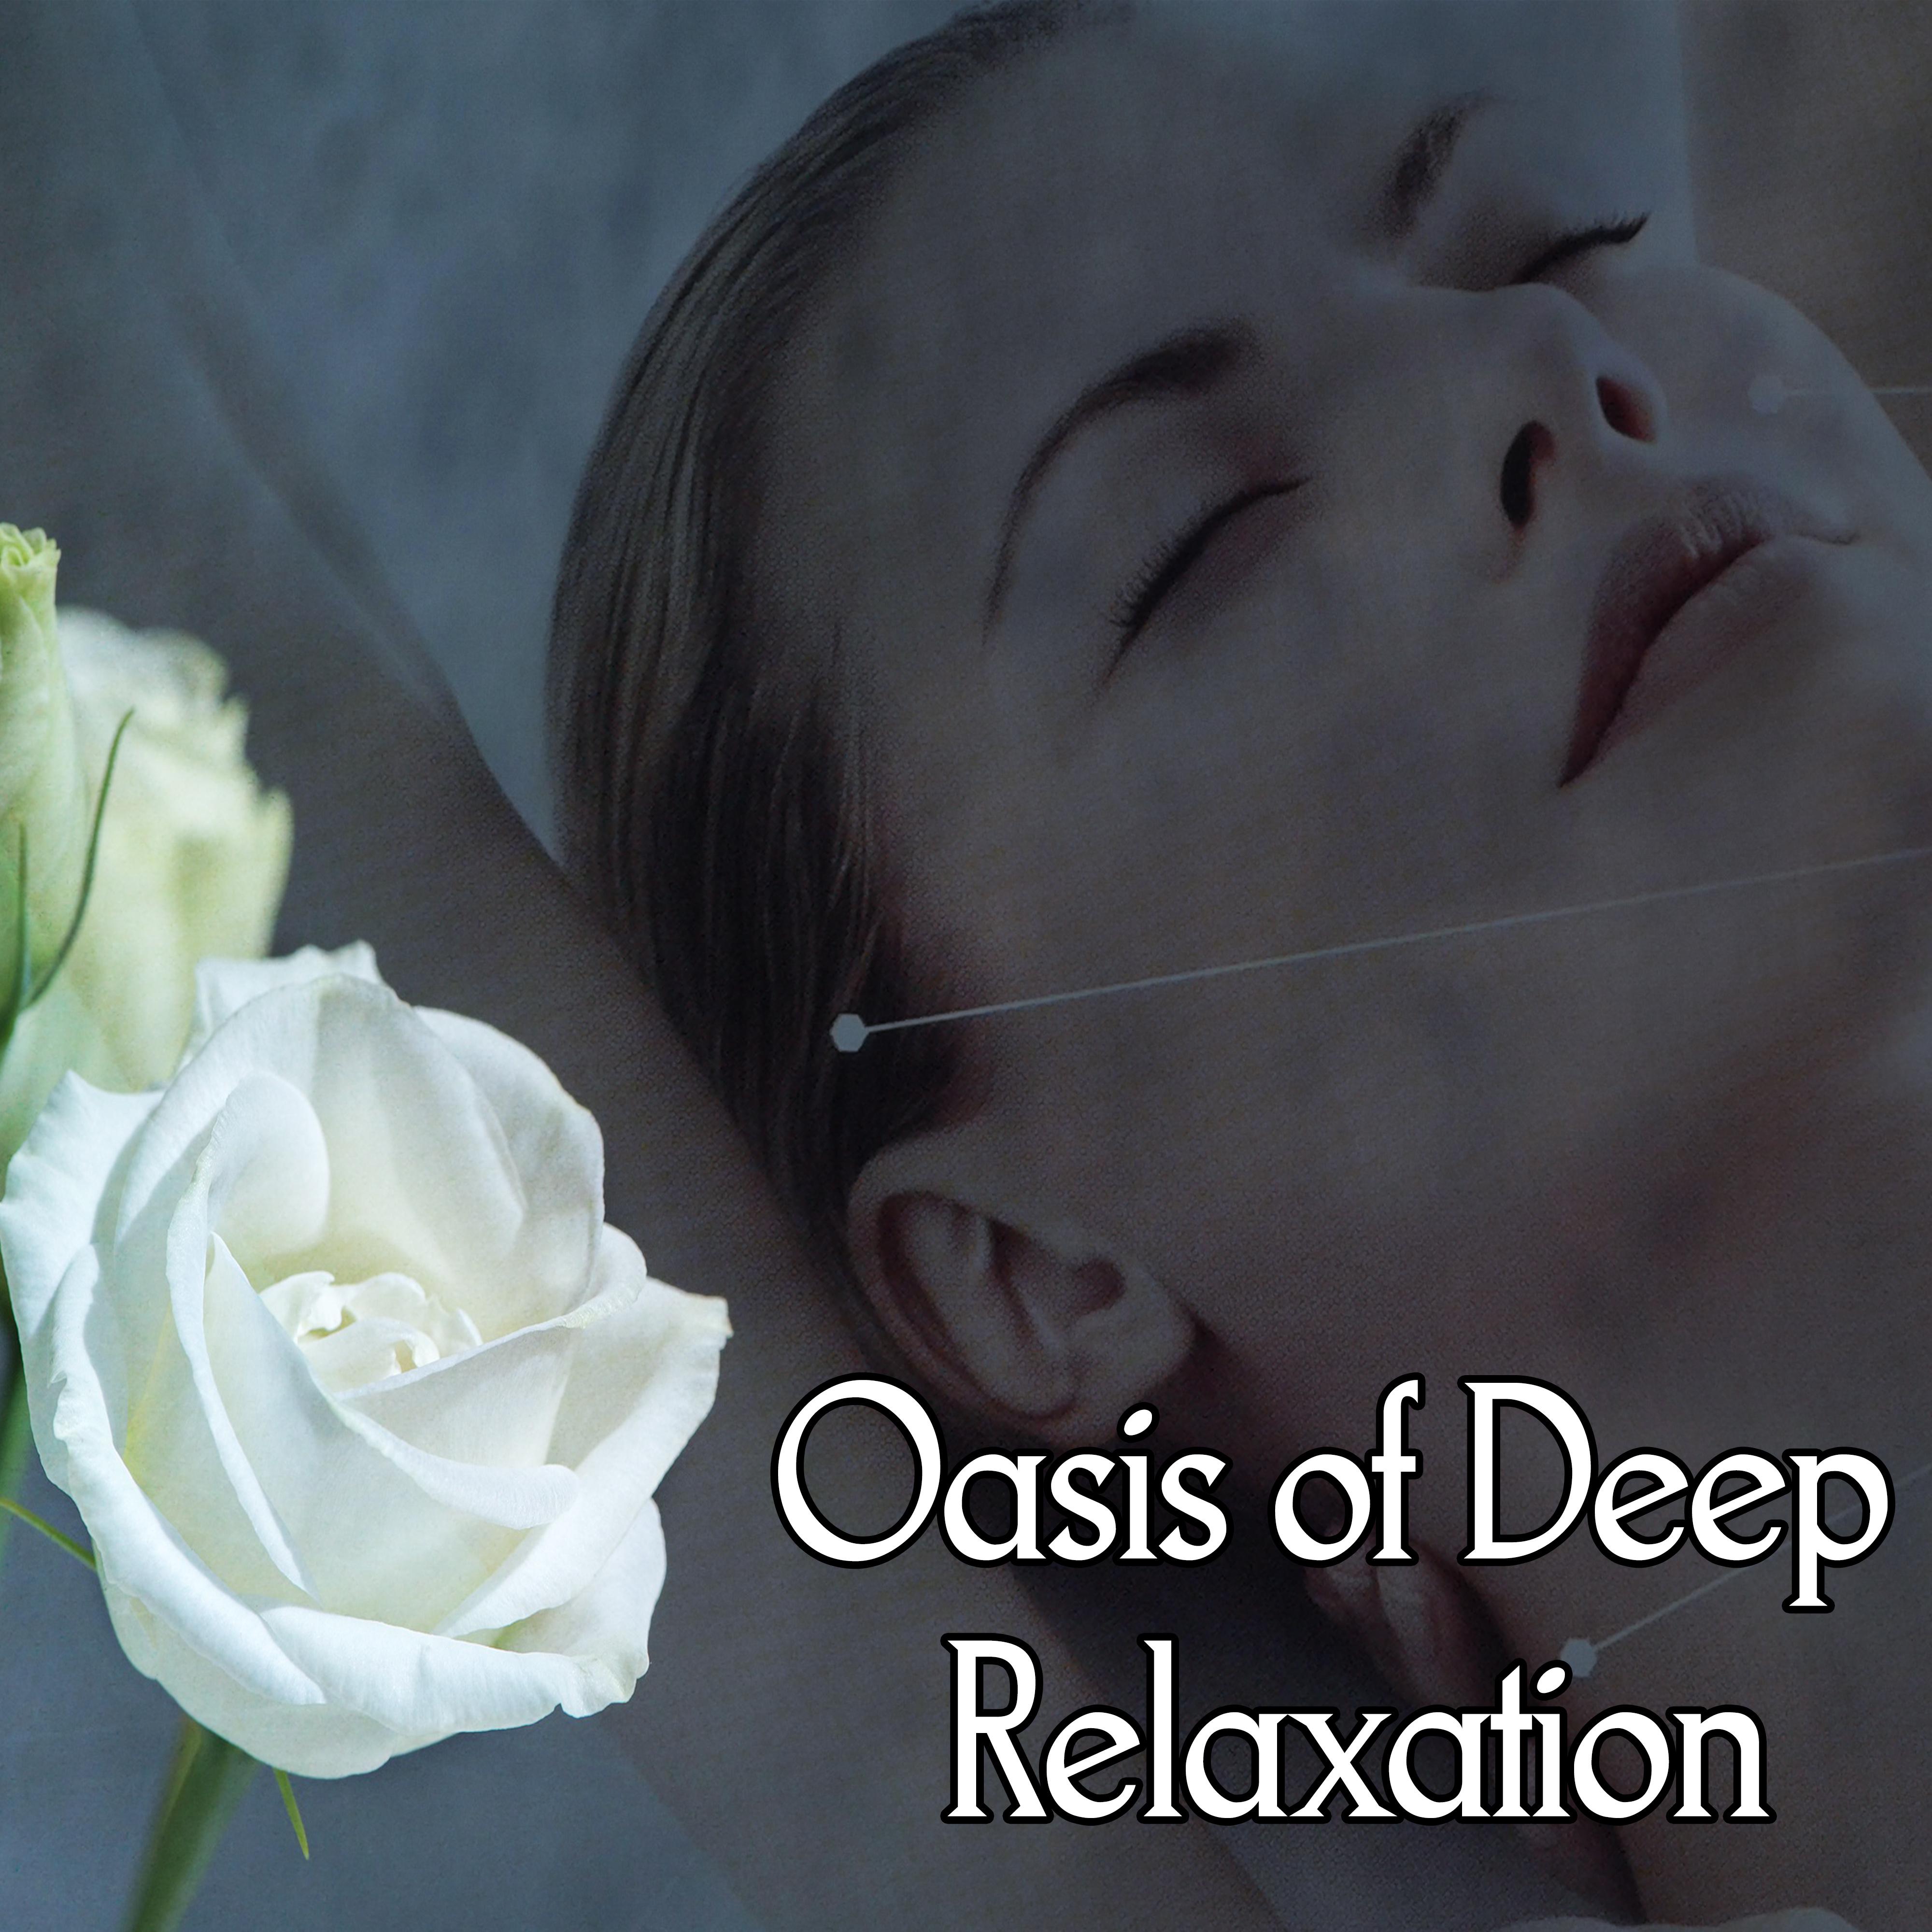 Oasis of Deep Relaxation - Healing Songs and Pure Sounds of Nature for Massage & Spa, Ultimate Wellness Songs, Ambient Music for Rest